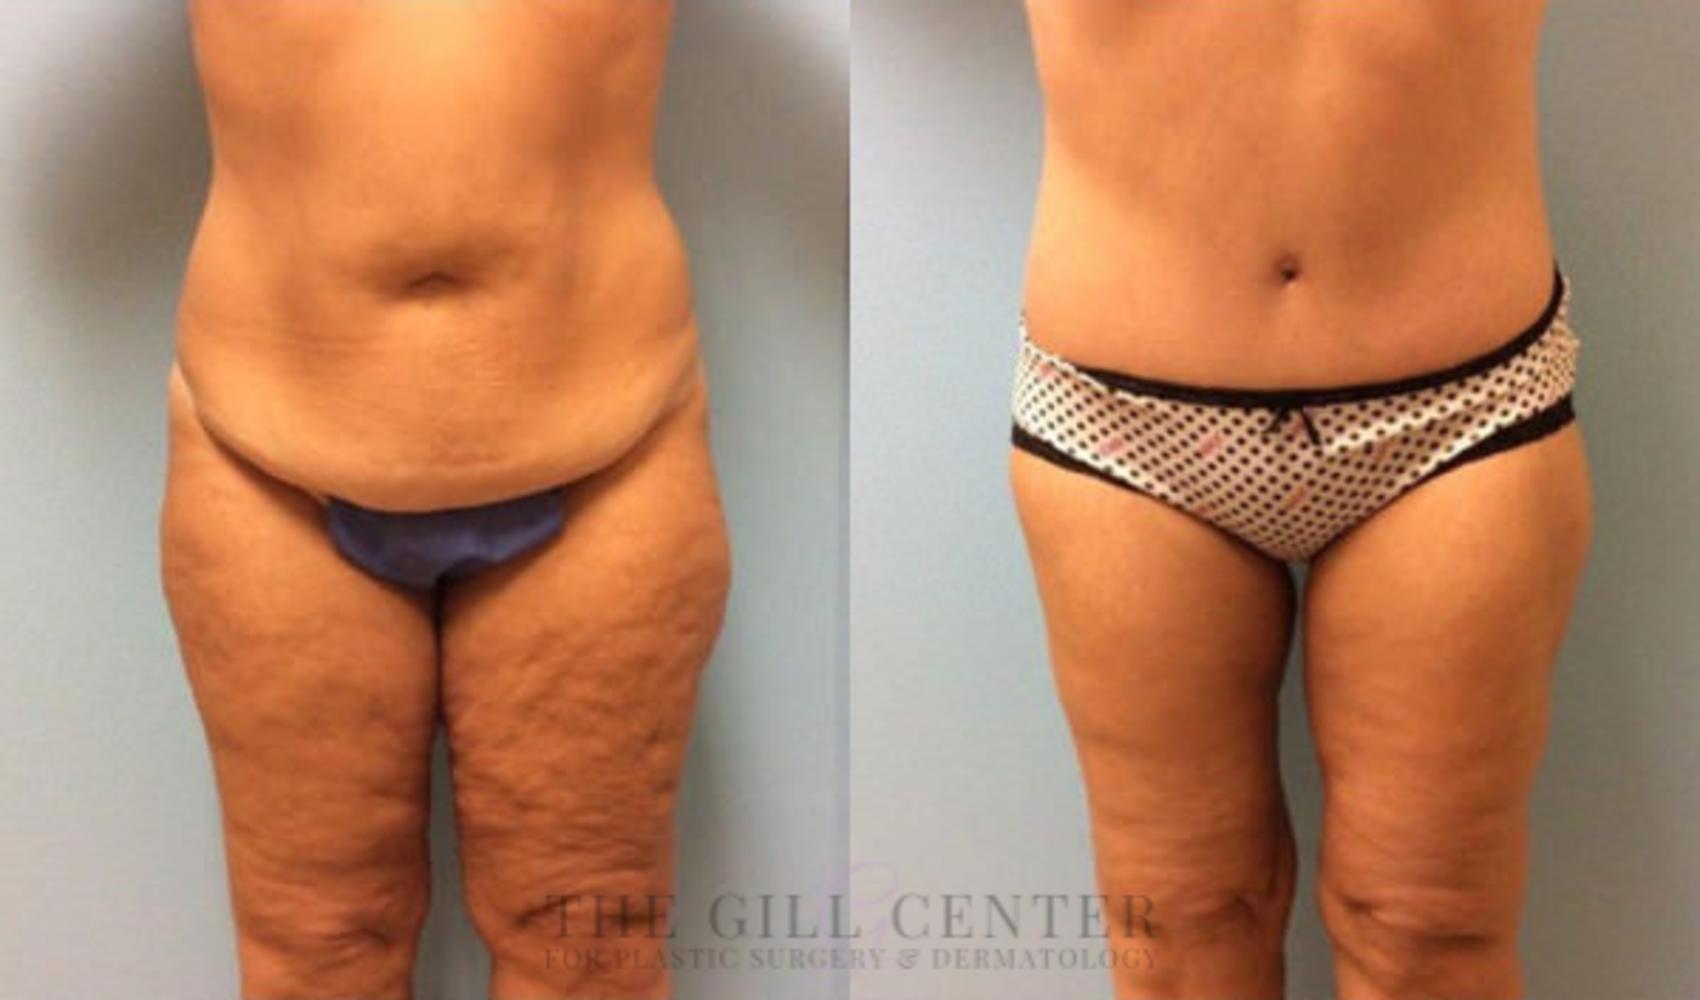 Lower Body Lift Surgery (Surgery After Weight Loss) The Woodlands